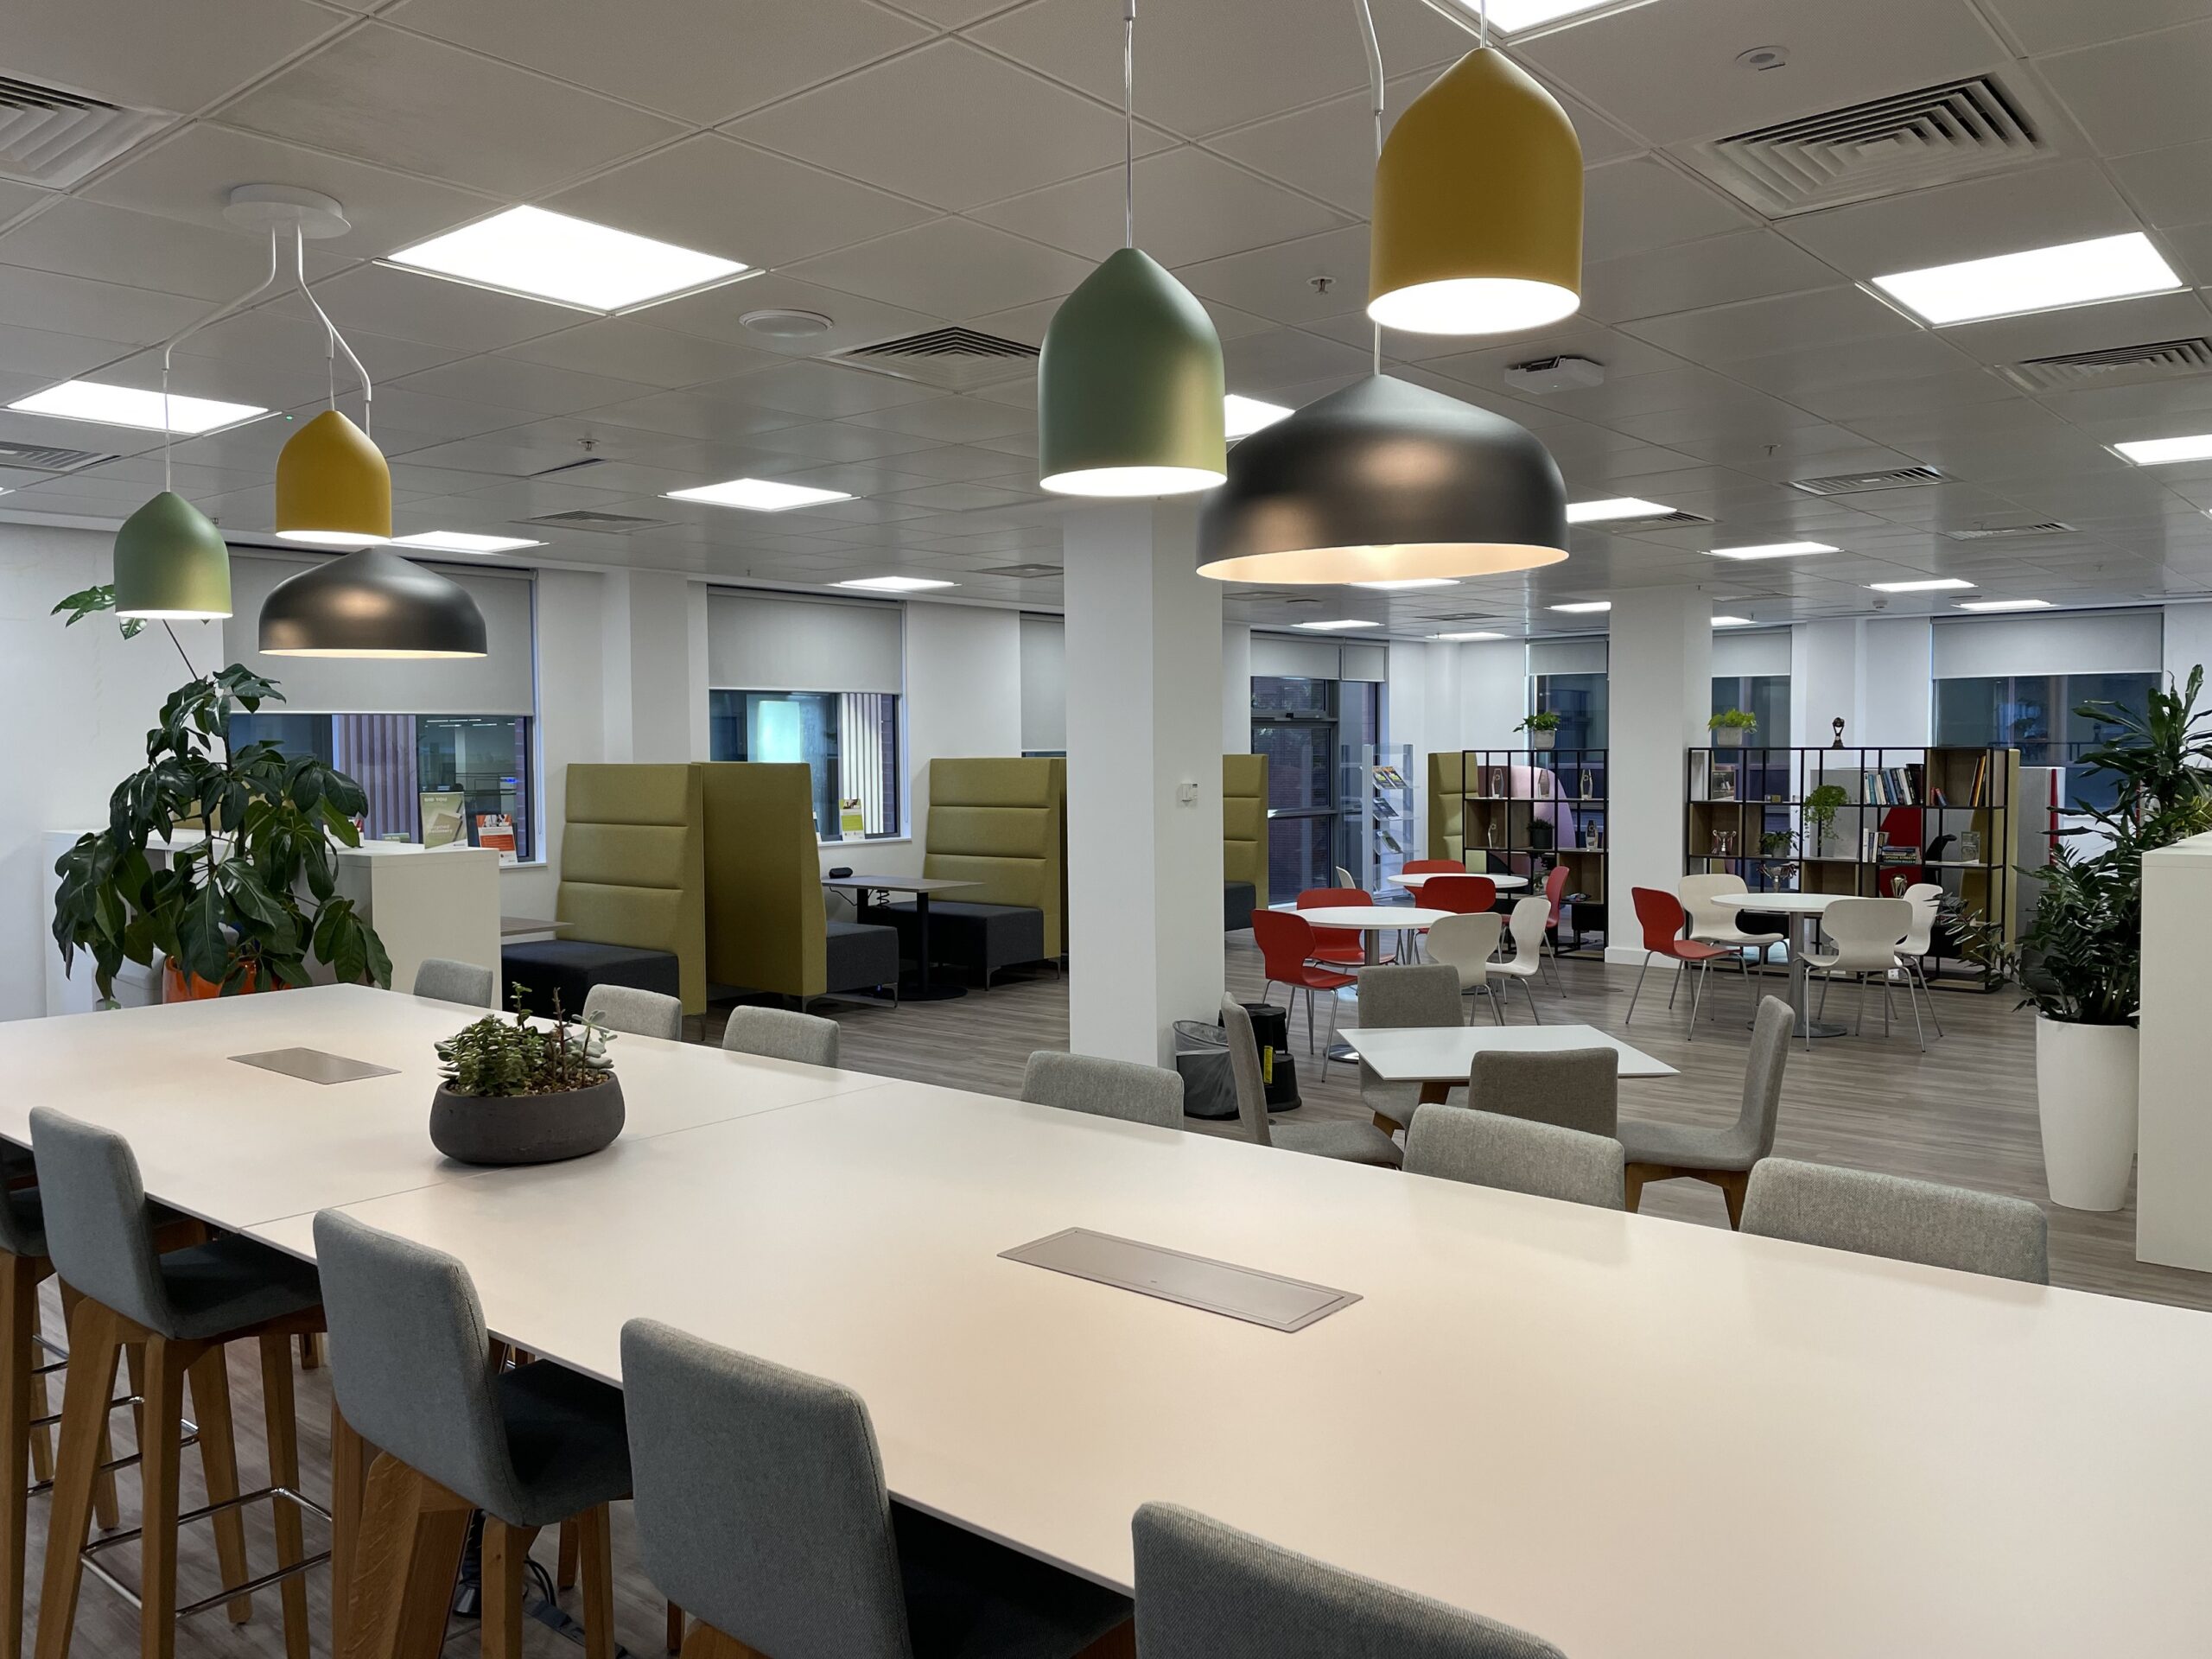 Cushman & Wakefield – Completed Project